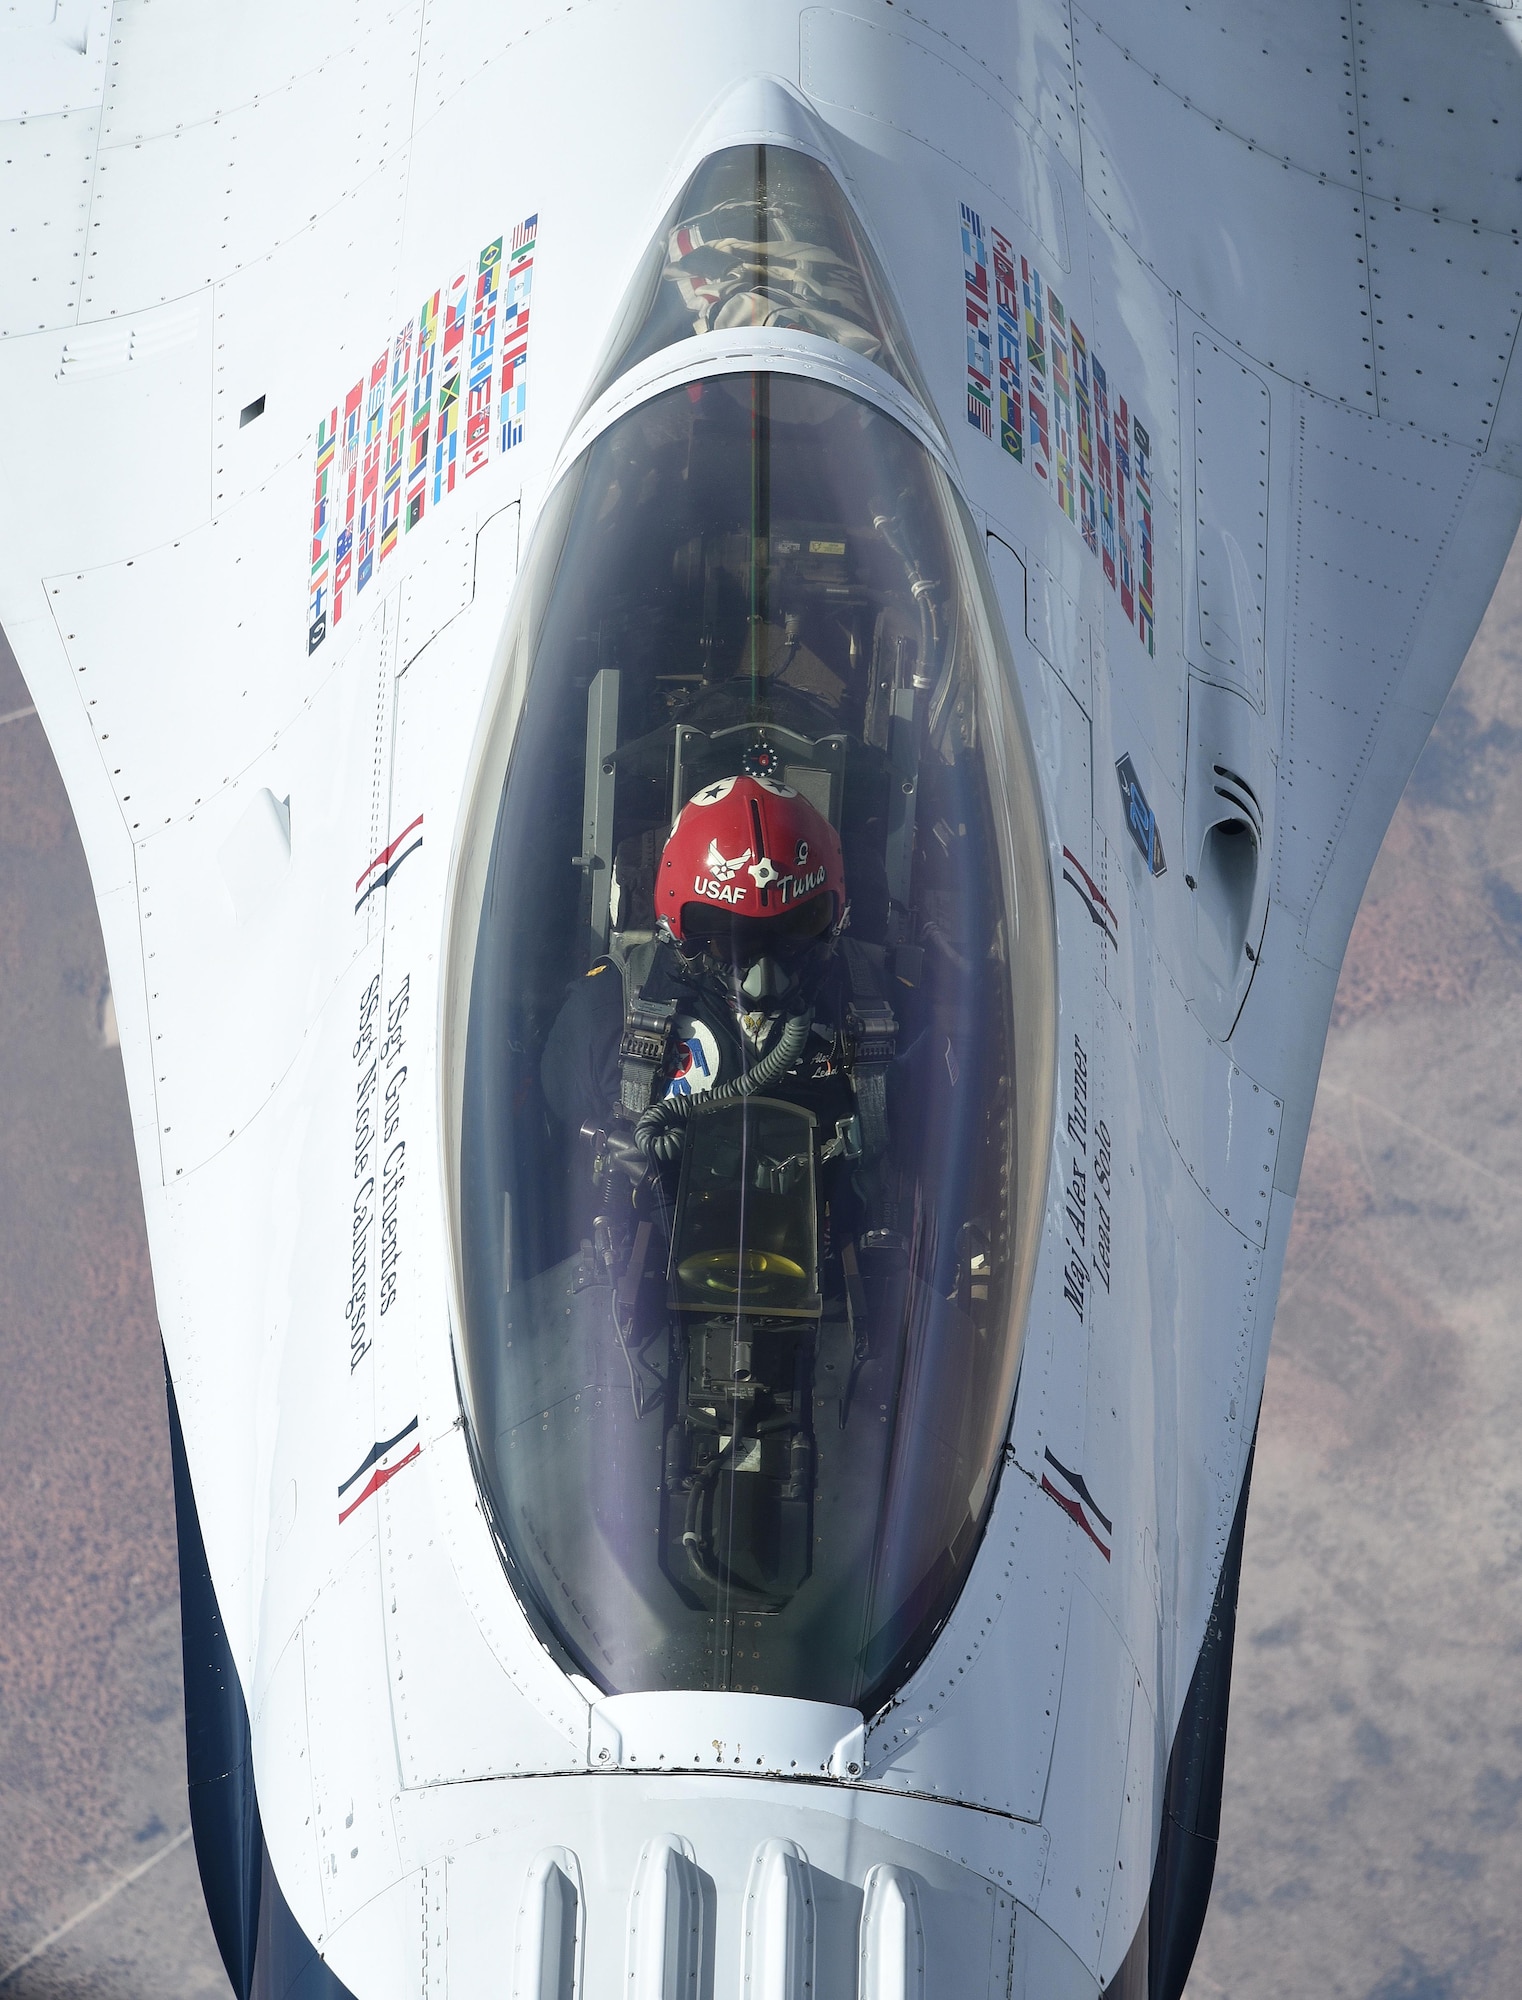 A KC-135 Stratotanker assigned to McConnell Air Force Base, Kan., refuels an F-16 Fighting Falcon Feb. 3, 2017, en route to Houston, Texas, where the Thunderbirds will perform a flyover during the 2017 Super Bowl. The Thunderbirds perform precision aerial maneuvers that demonstrate the capabilities of Air Force high performance aircraft to people throughout the world. (U.S. Air Force photo/Airman 1st Class Erin McClellan)